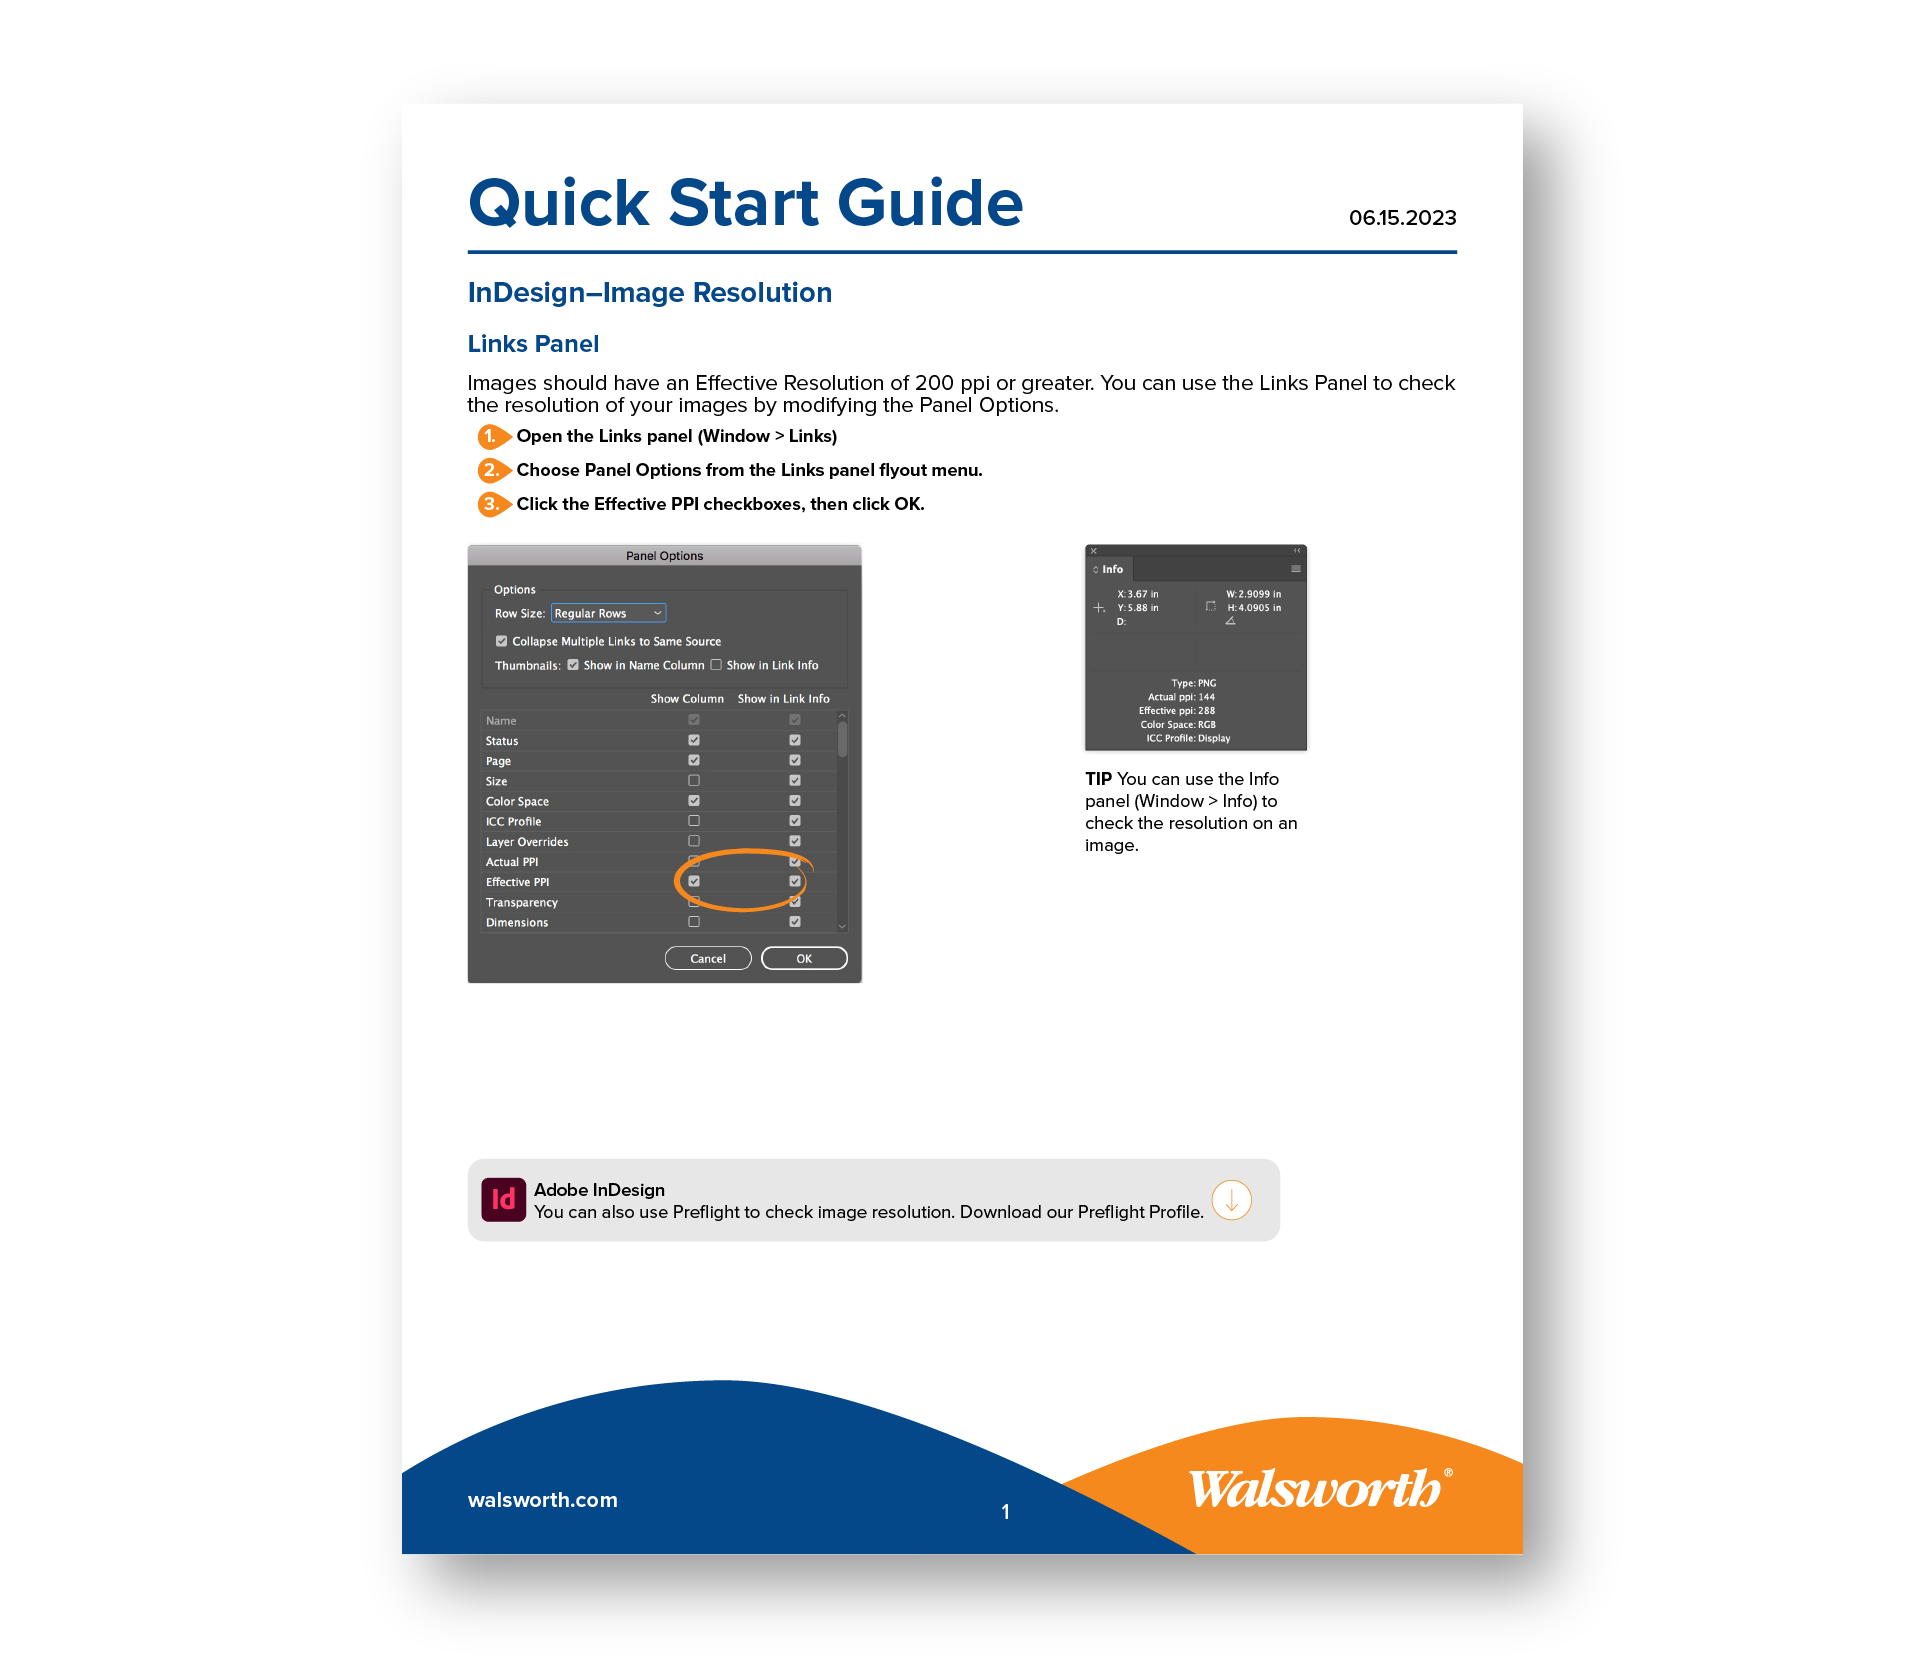 InDesign_Image_Res-Quick Start Guide Icons